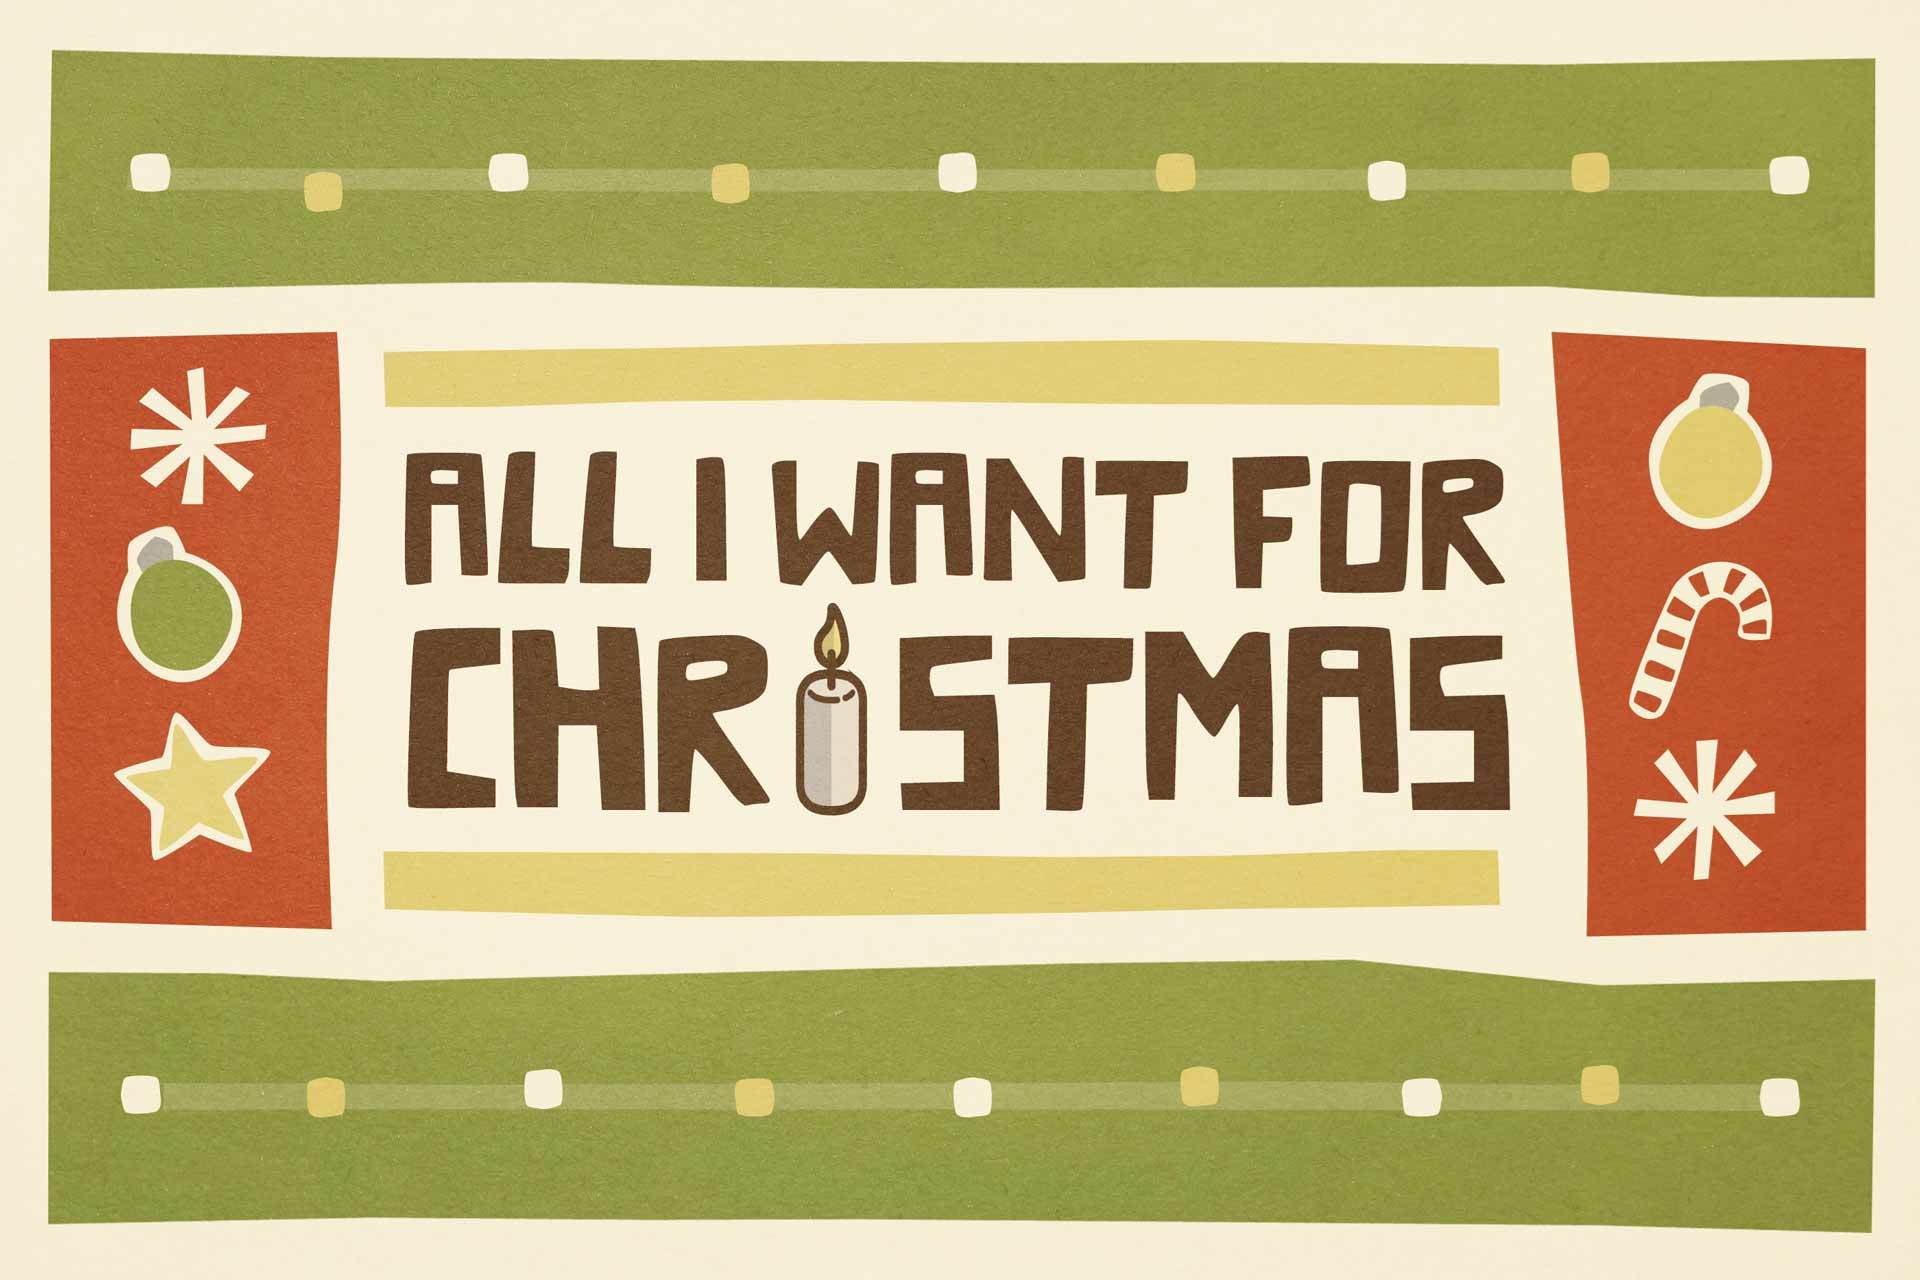 Link to All I Want For Christmas detail page